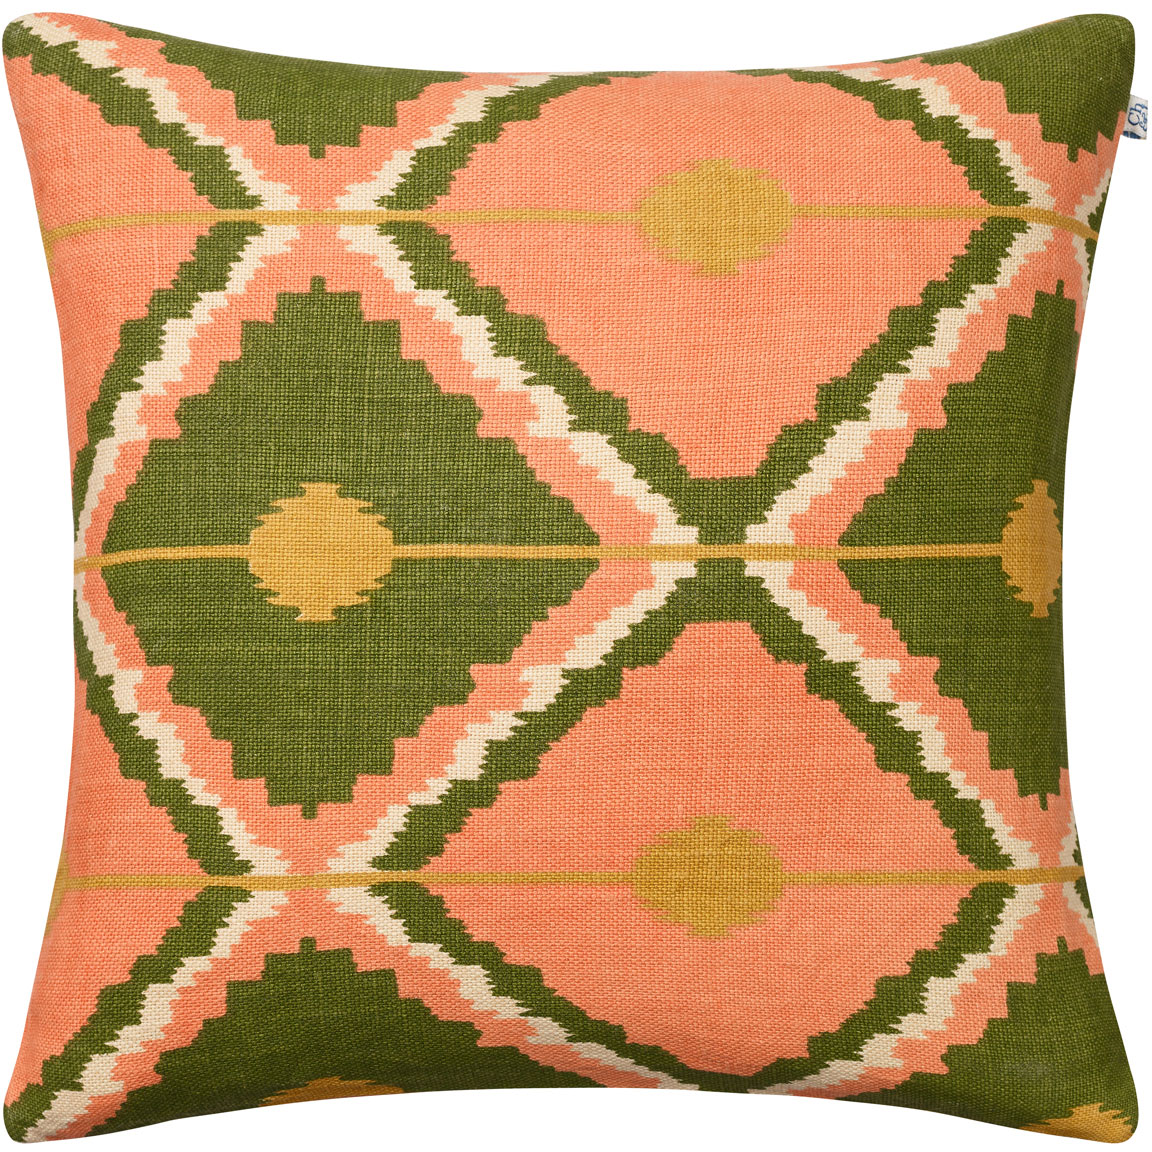 Pune Cushion Cover 50x50 cm, Spicy Yellow / Green